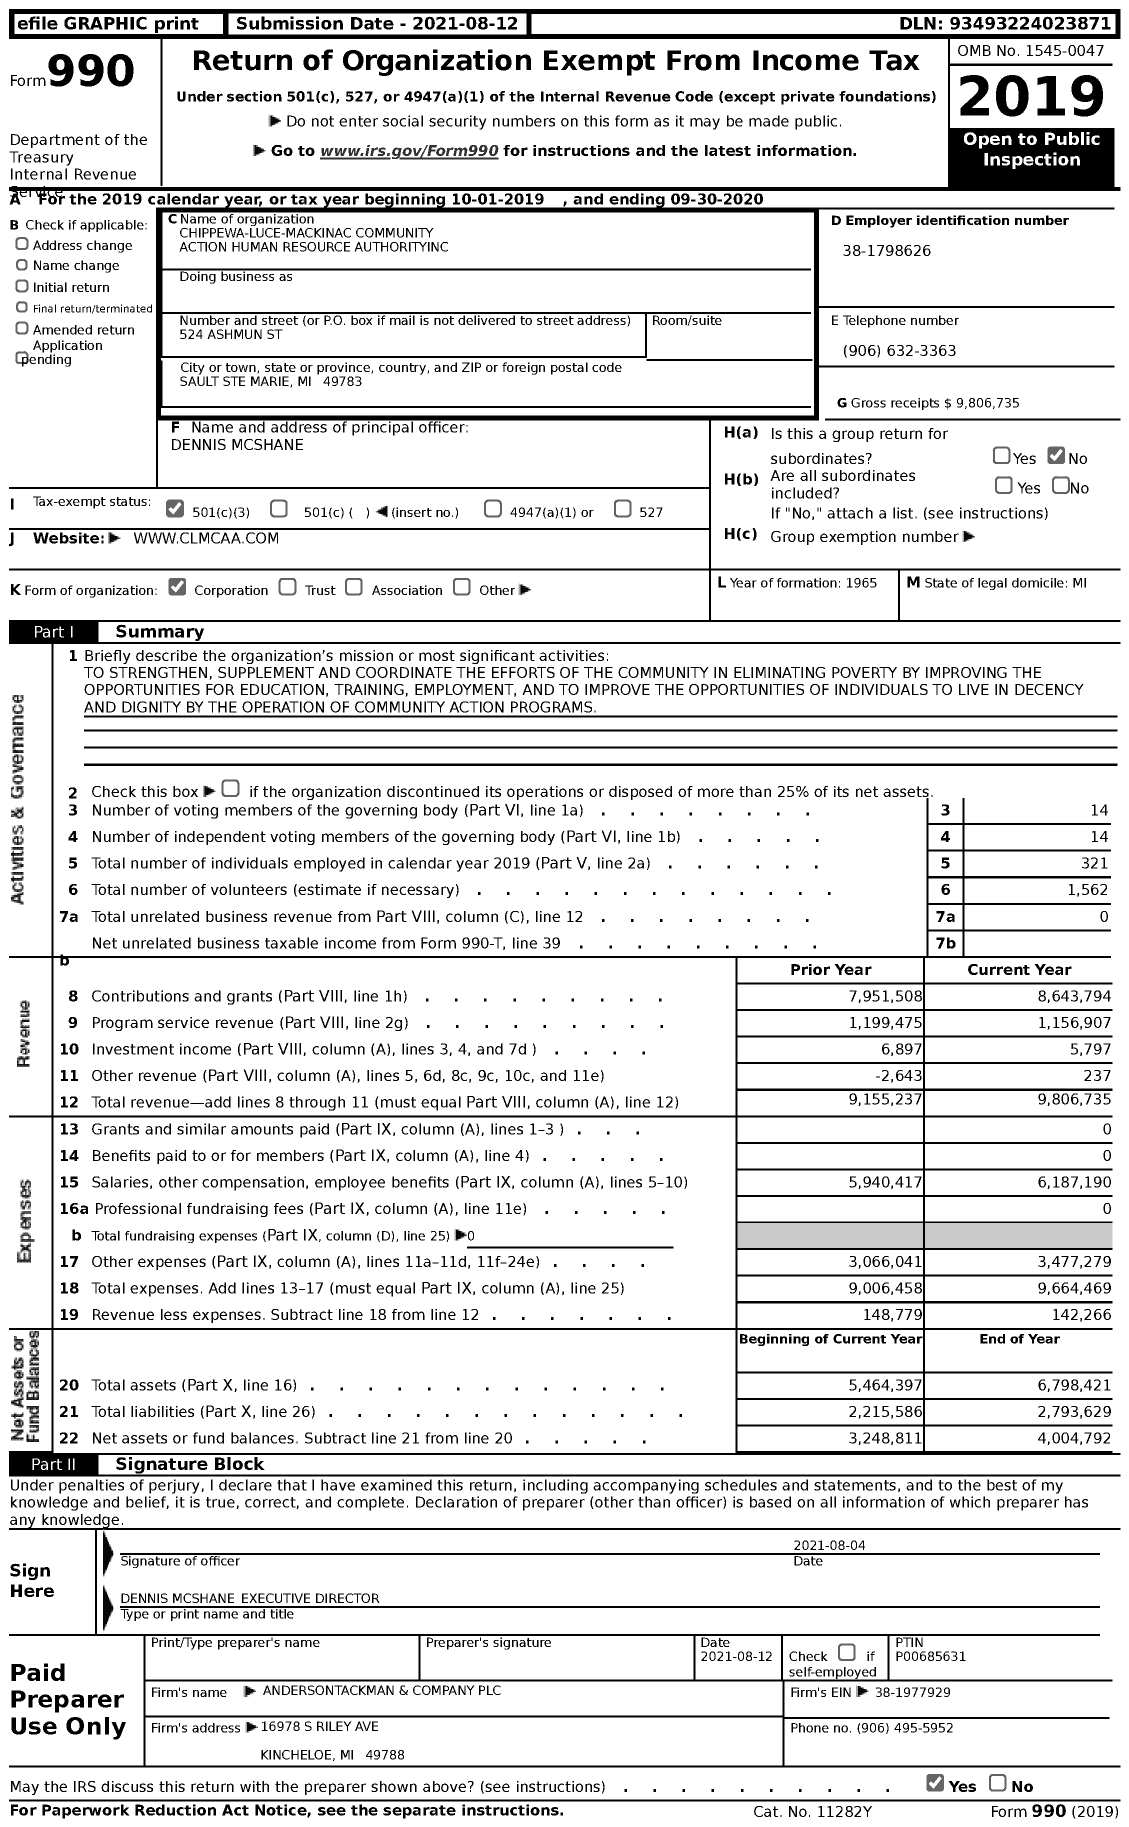 Image of first page of 2019 Form 990 for Chippewa-Luce-Mackinac Community Action Human Resource Authority